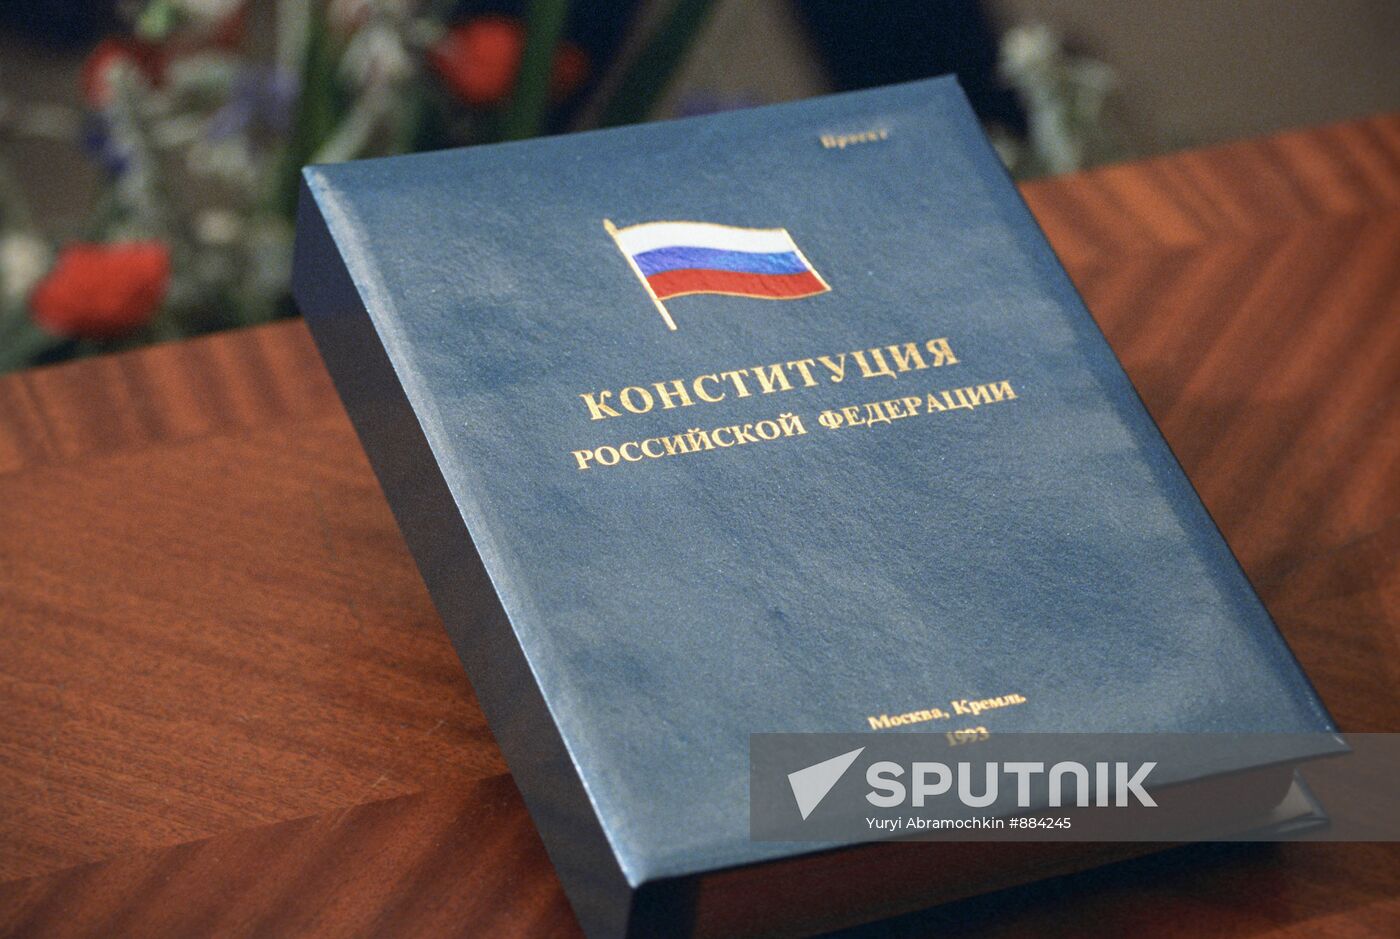 Copy of the Russian Constitution